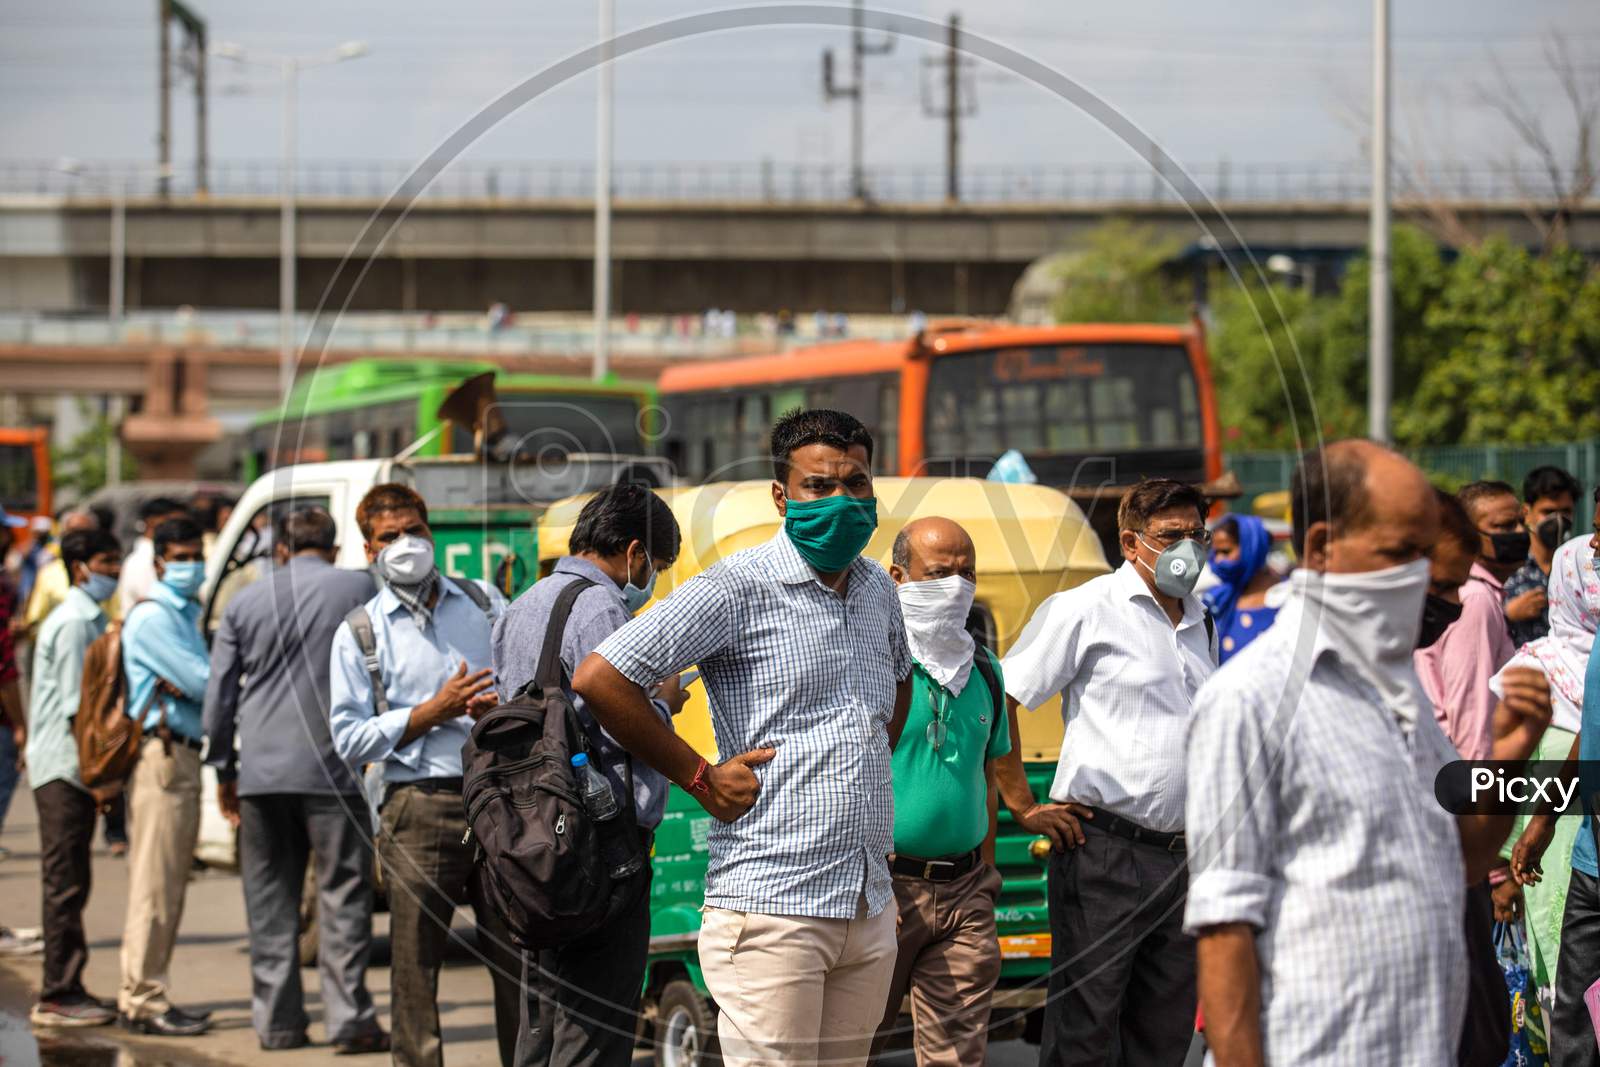 People flout social distancing norms as they wait to board a bus at Anand Vihar, in New Delhi, India On June 23, 2020.